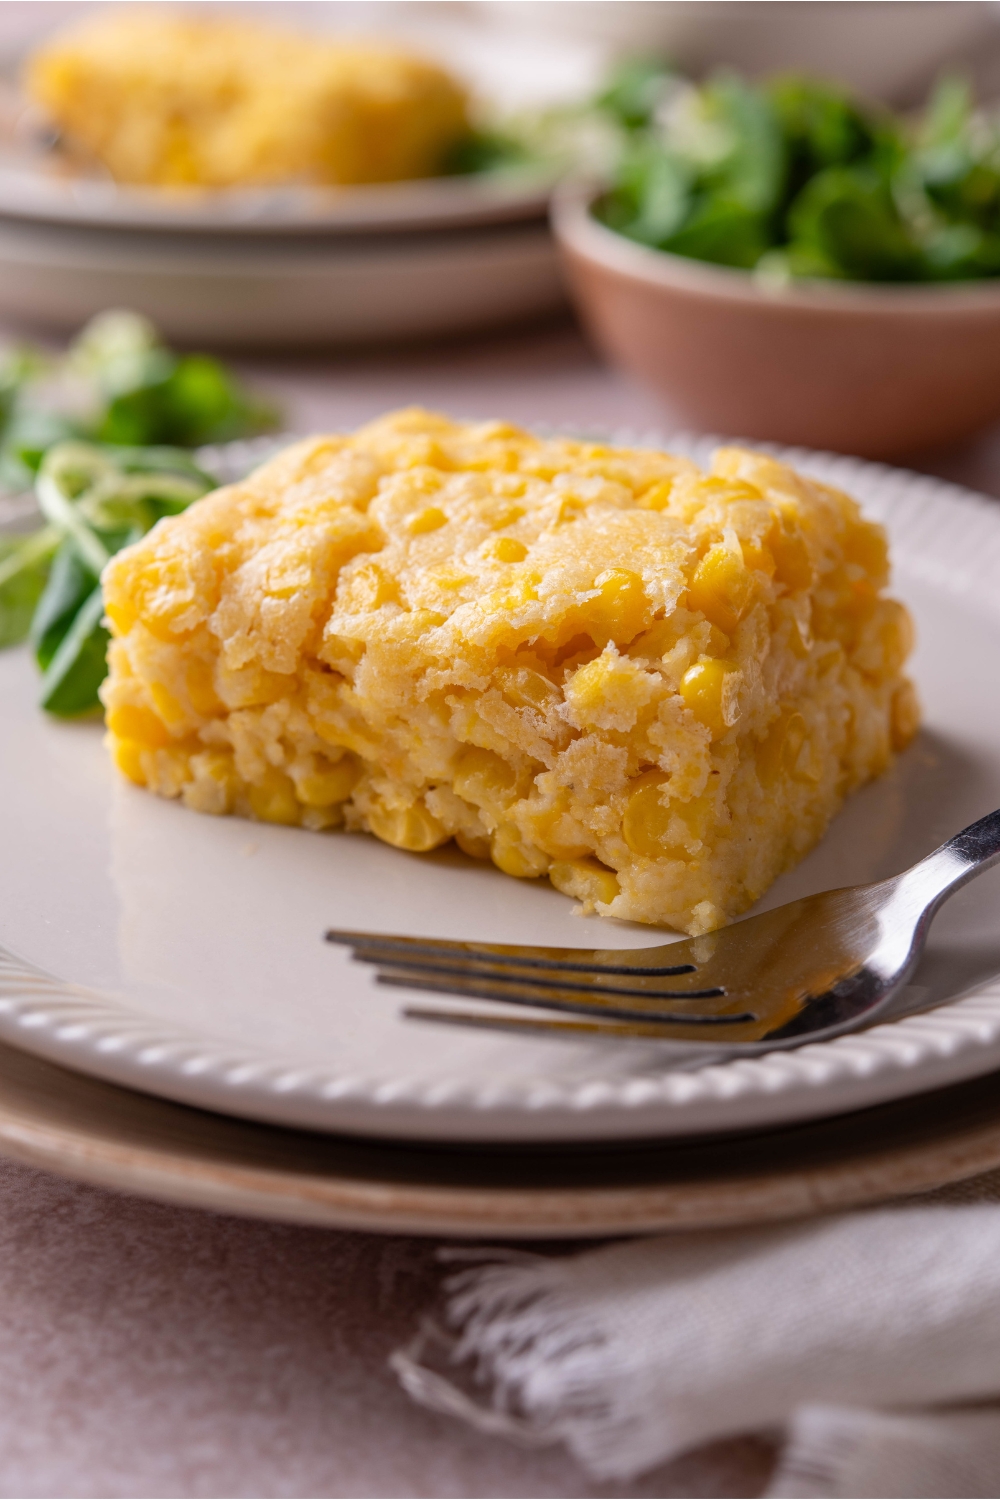 A square of corn casserole with a fork and a pile of fresh greens on the plate.